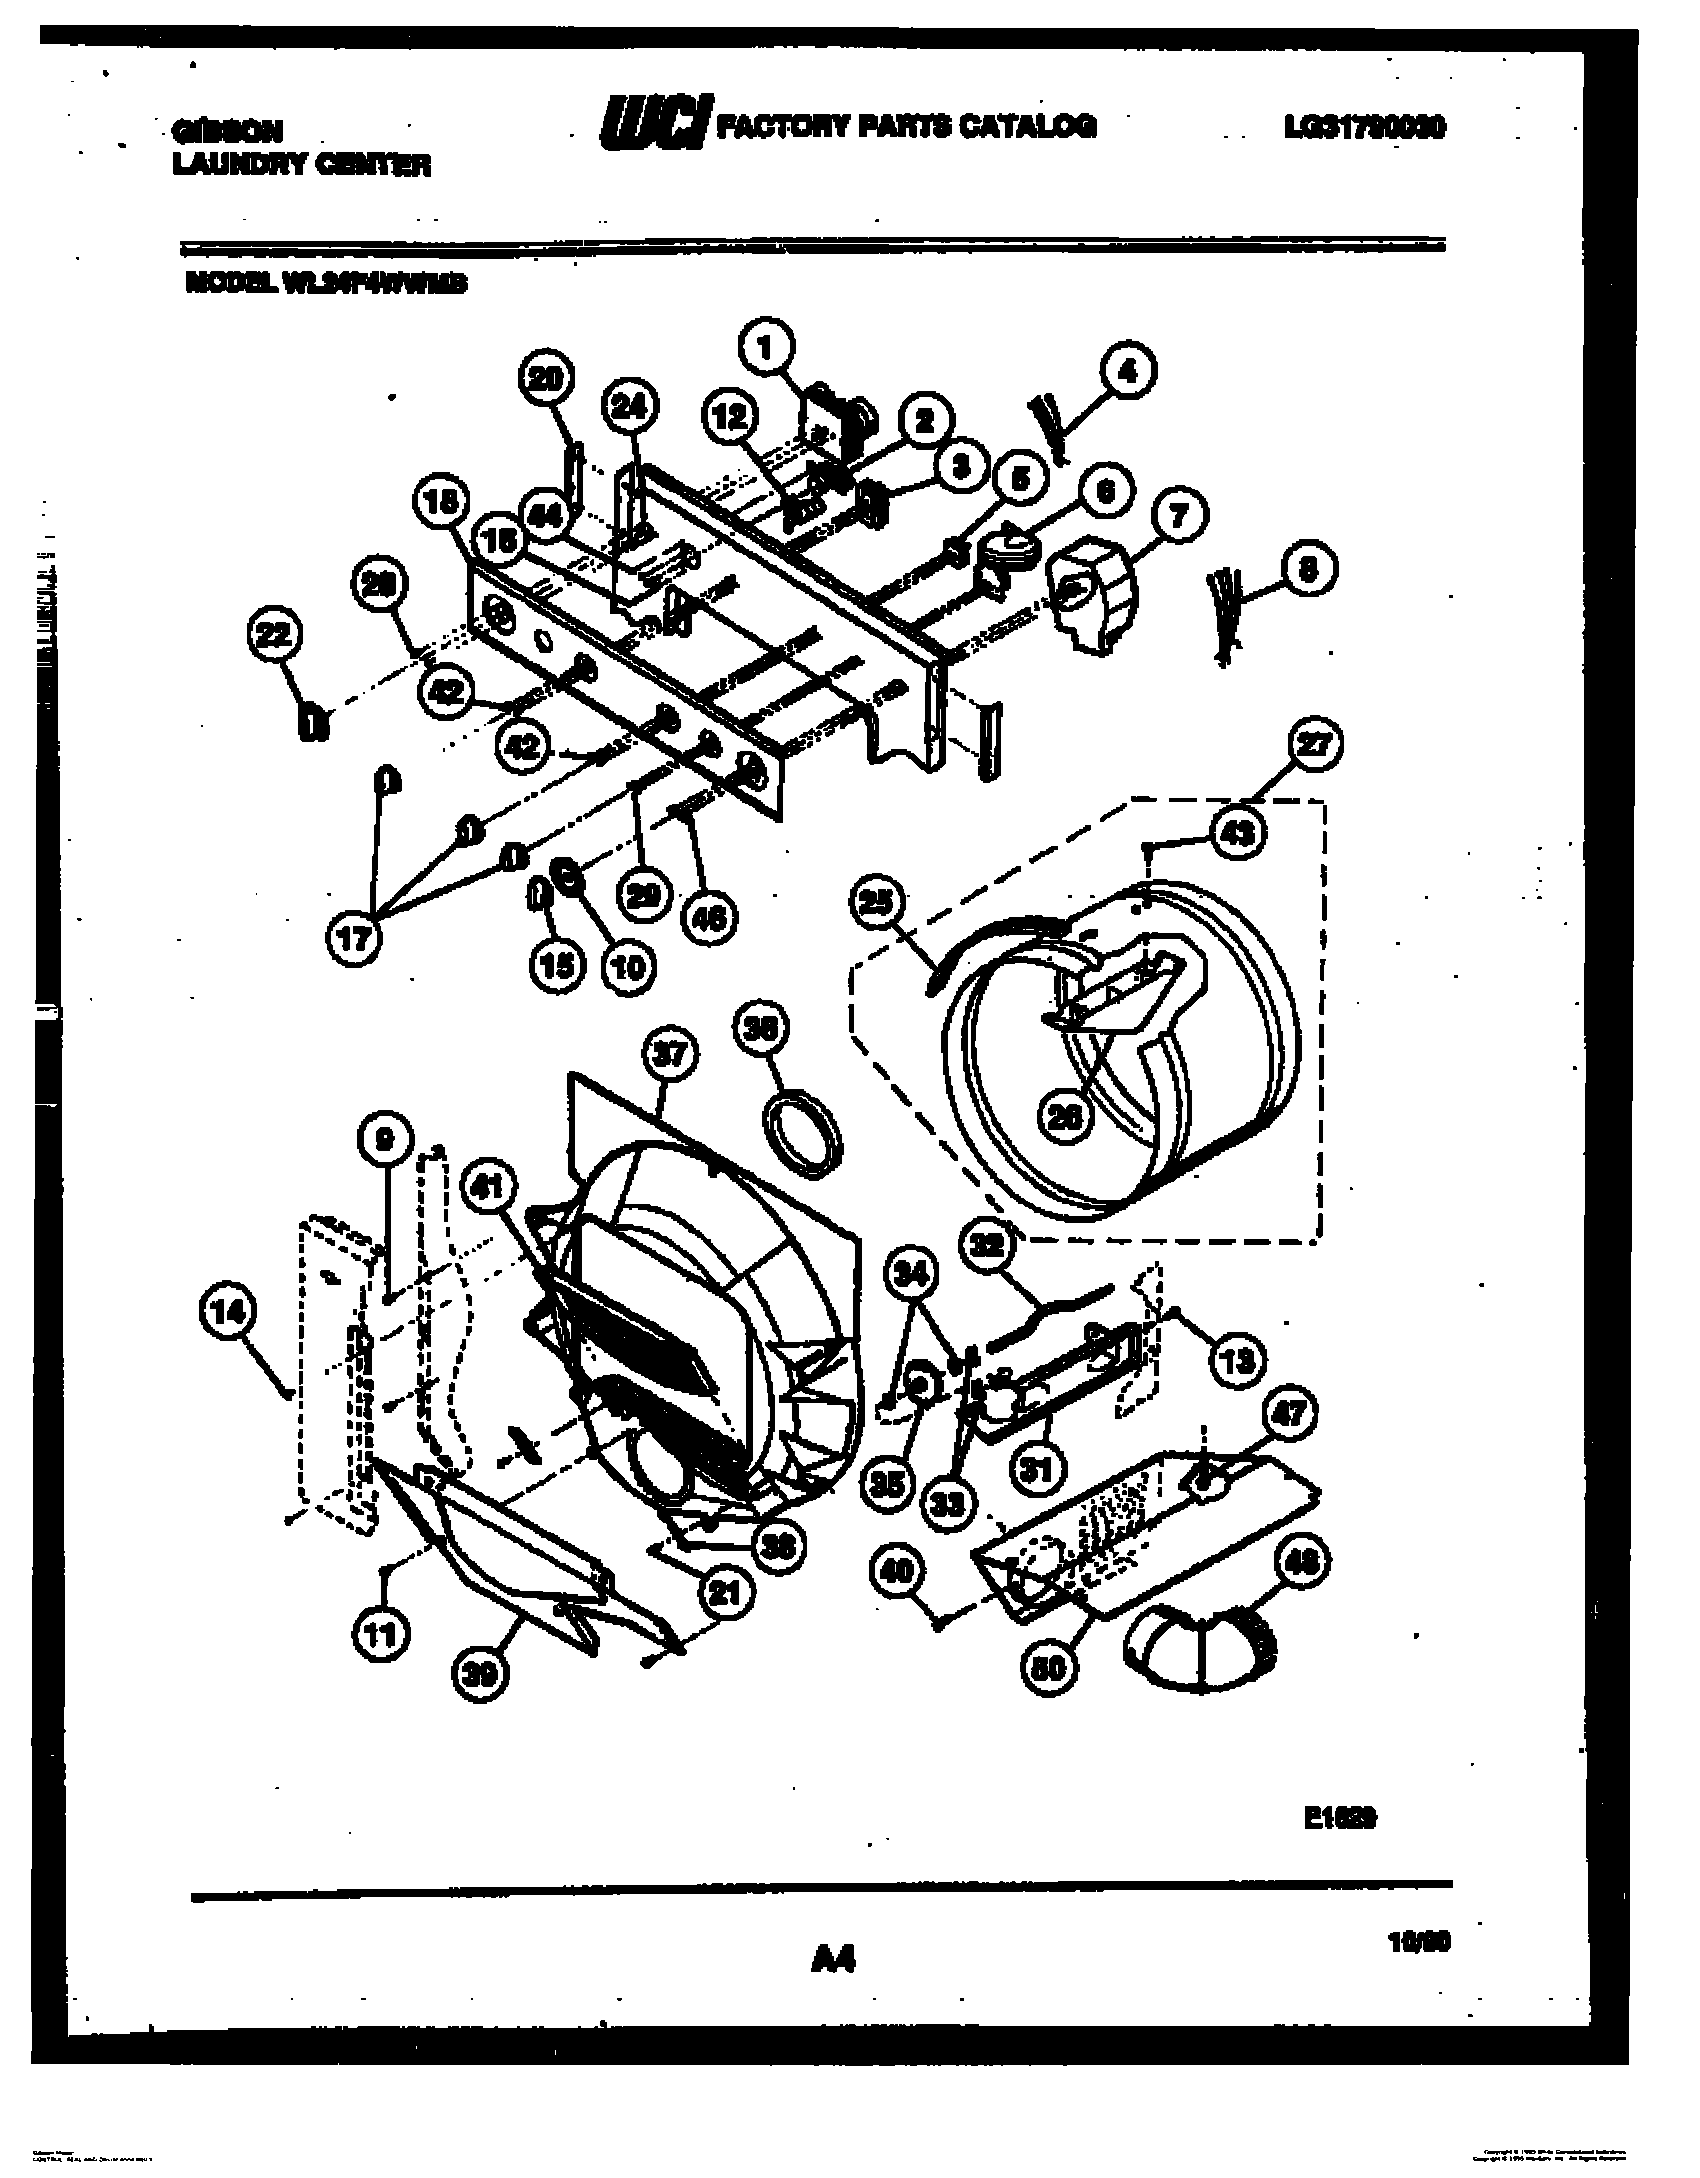 03 - CONTROL, SEAL AND DRUM ASSEMBLY